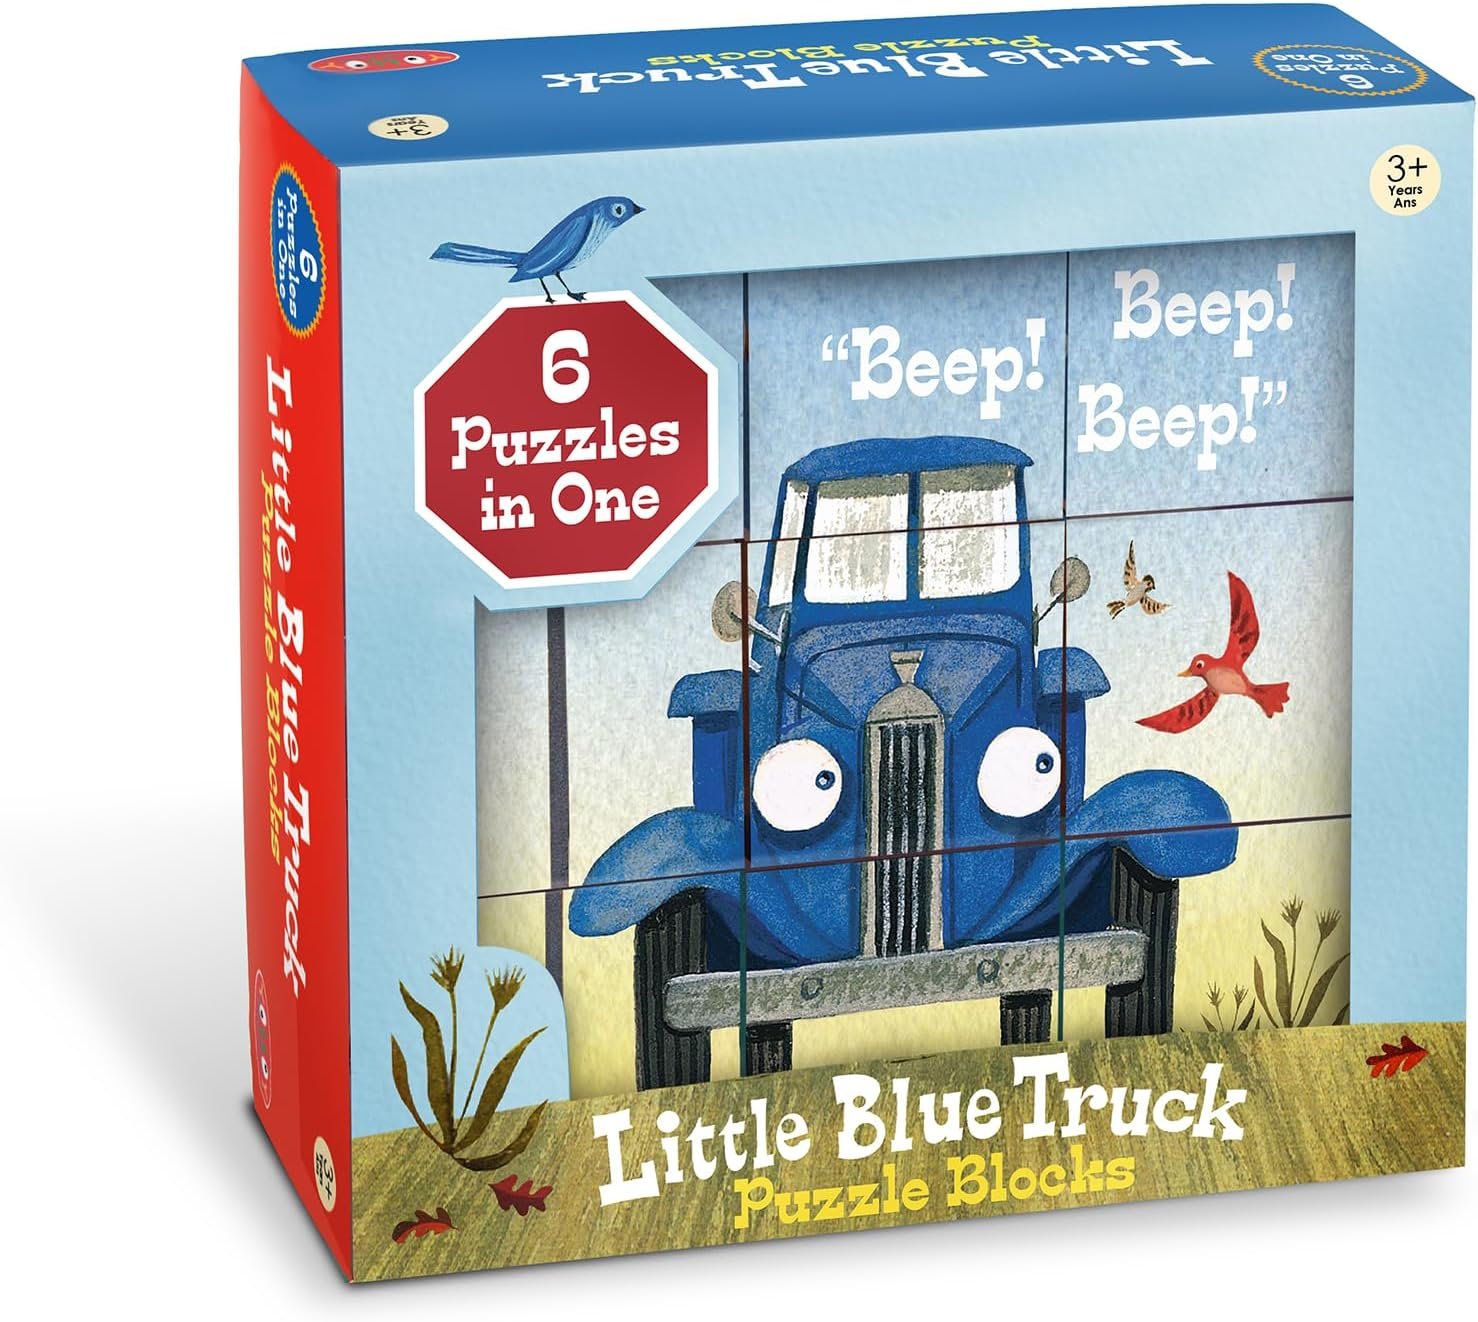 Little Blue Truck 6 Puzzles in 1